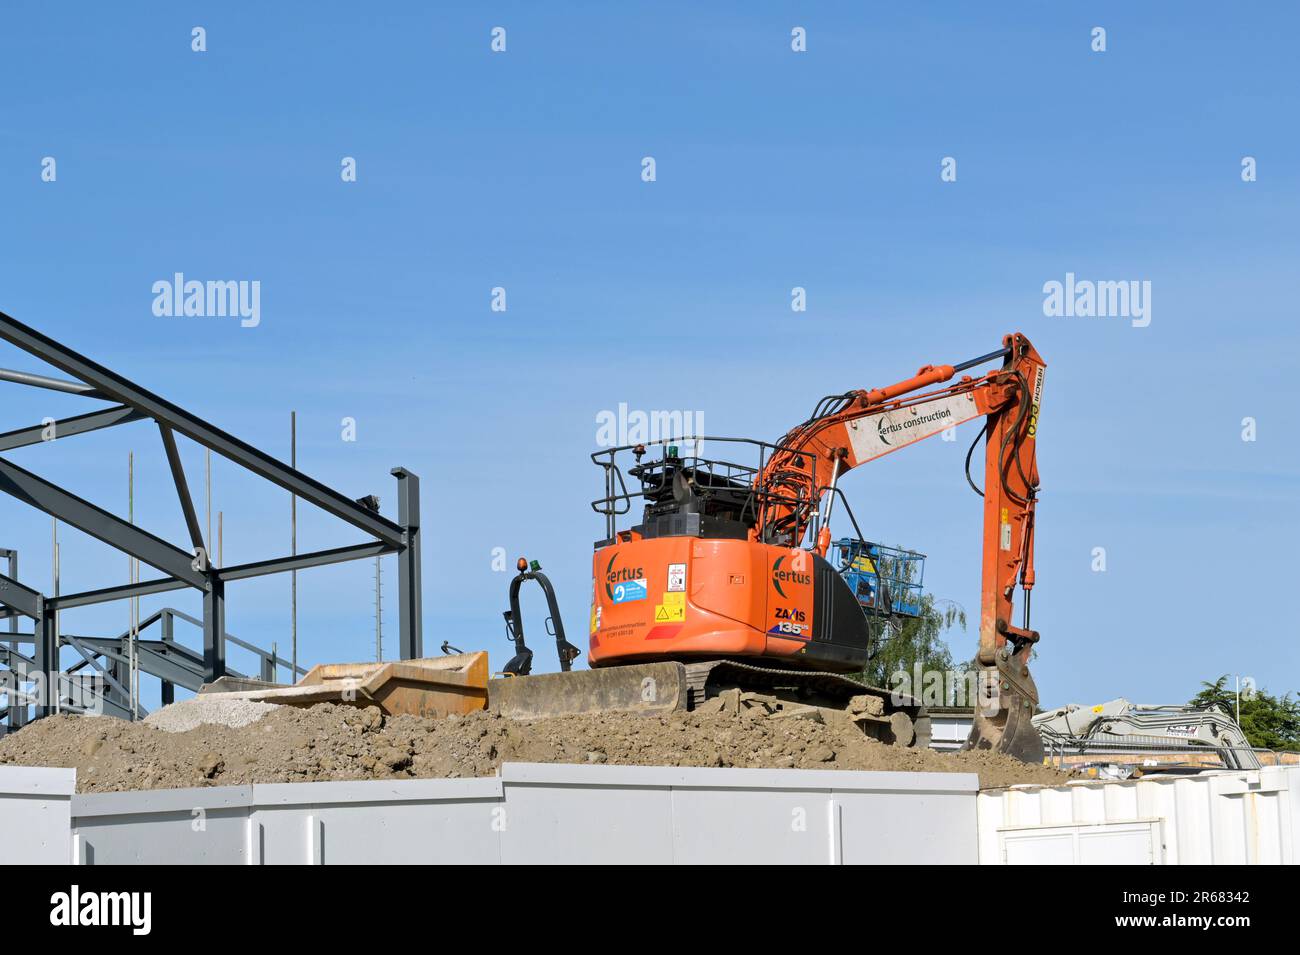 Church Village, Pontypridd, Wales - May 2023: Mini excavator on top of a pile of soil on the construction site for a new primary school in south Wales Stock Photo